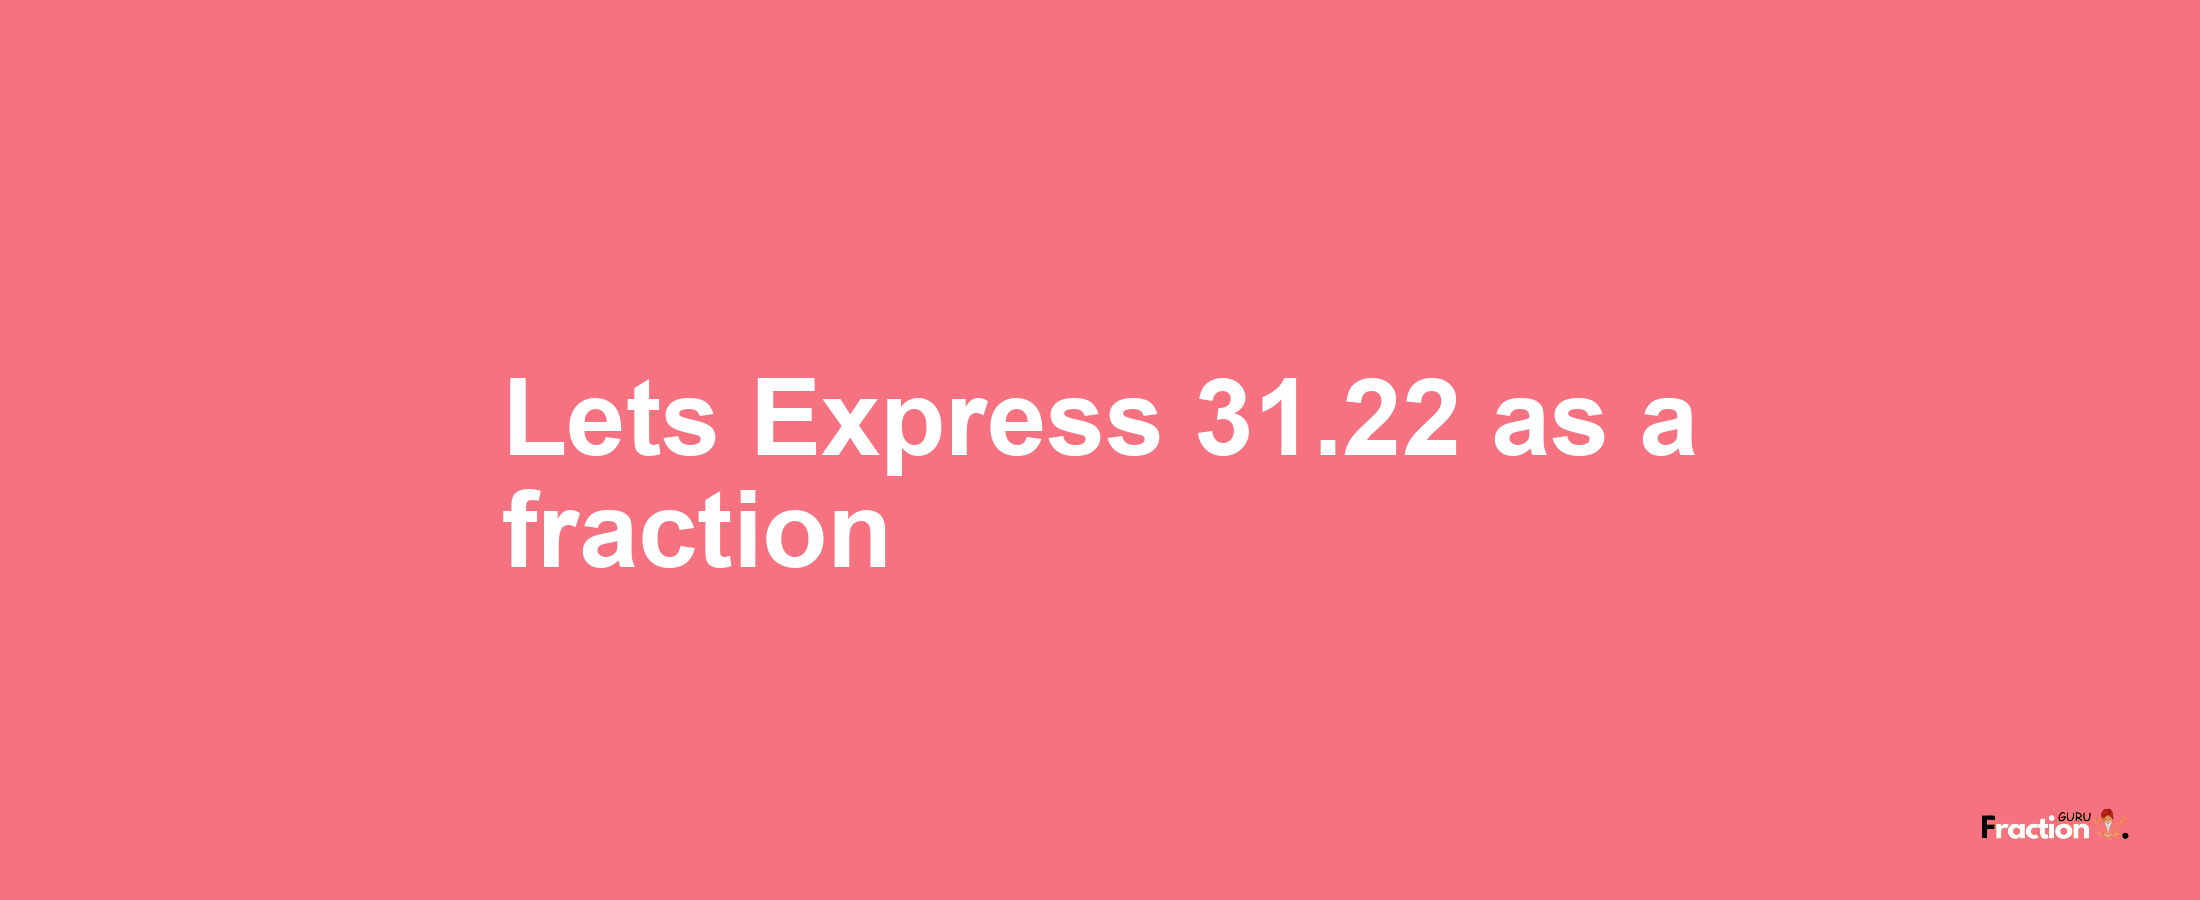 Lets Express 31.22 as afraction